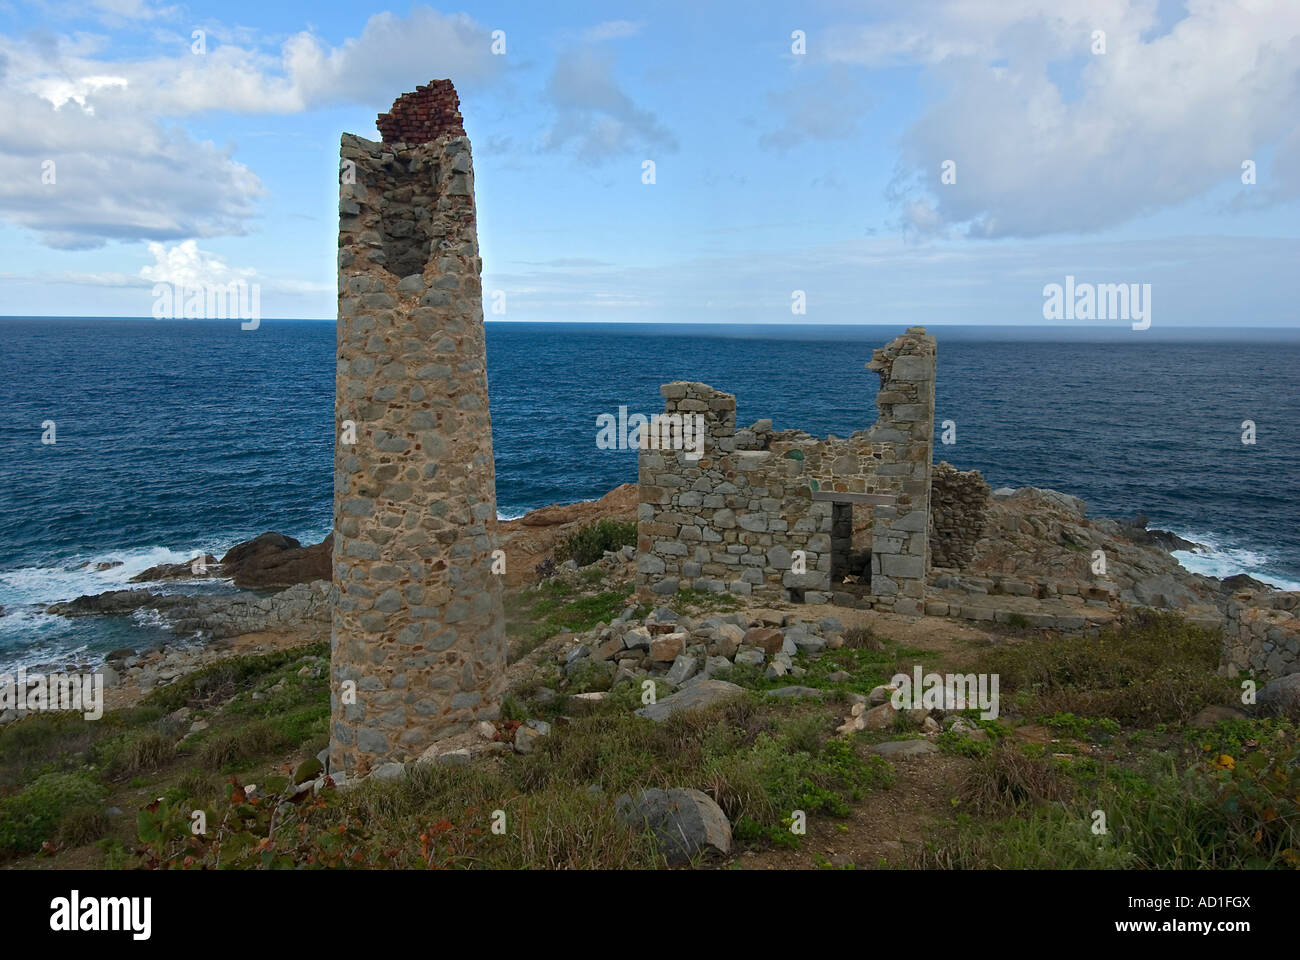 British Virgin Islands BVI, light house, ruined, excursion, summer, holiday, vacation Stock Photo